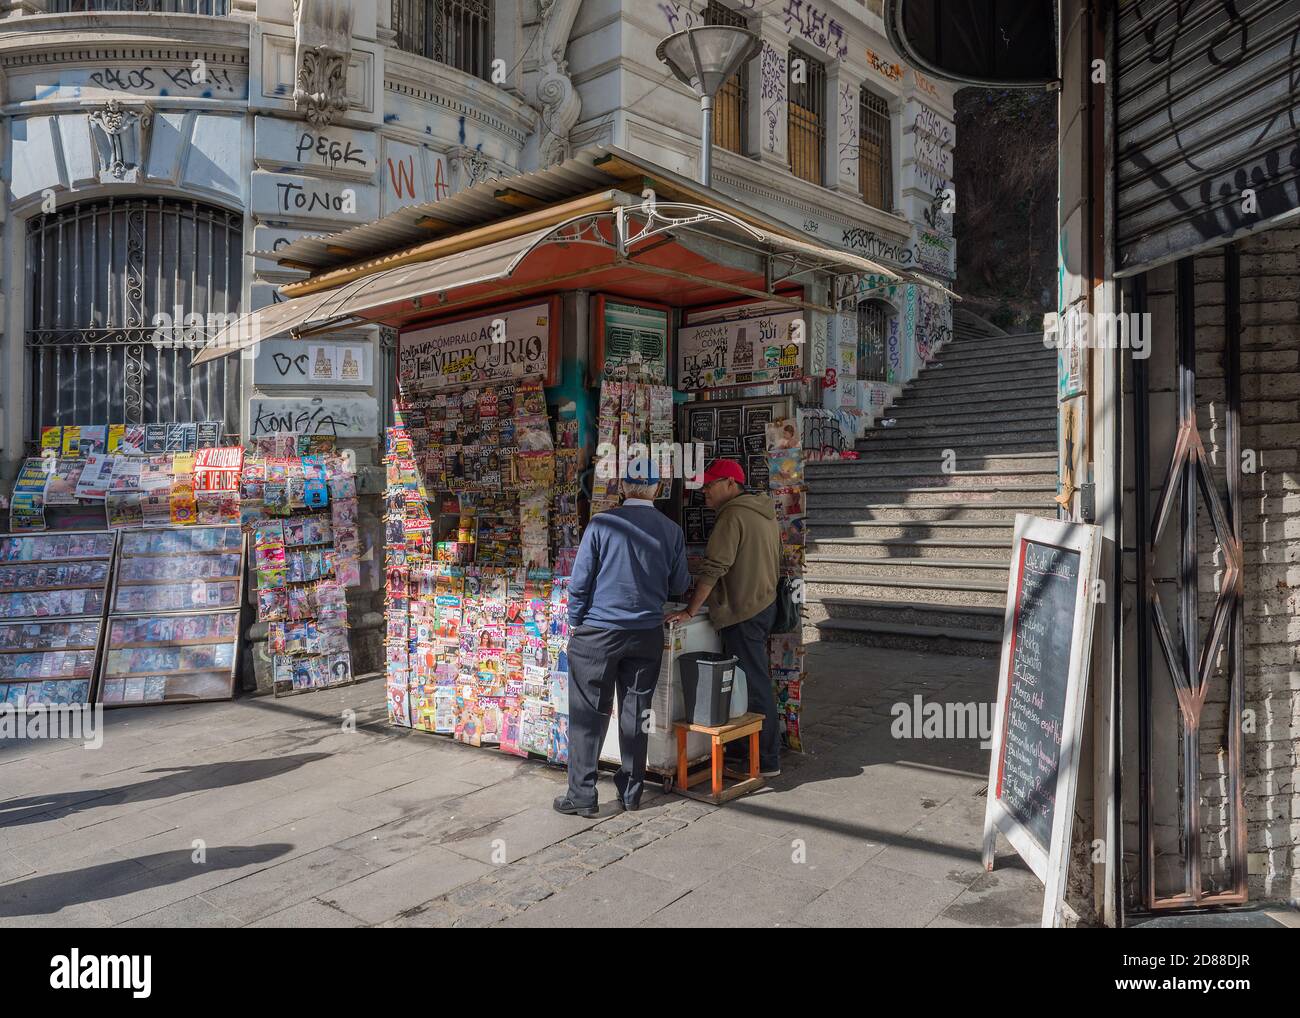 small newspaper stand on a street in Valparaiso, Chile Stock Photo